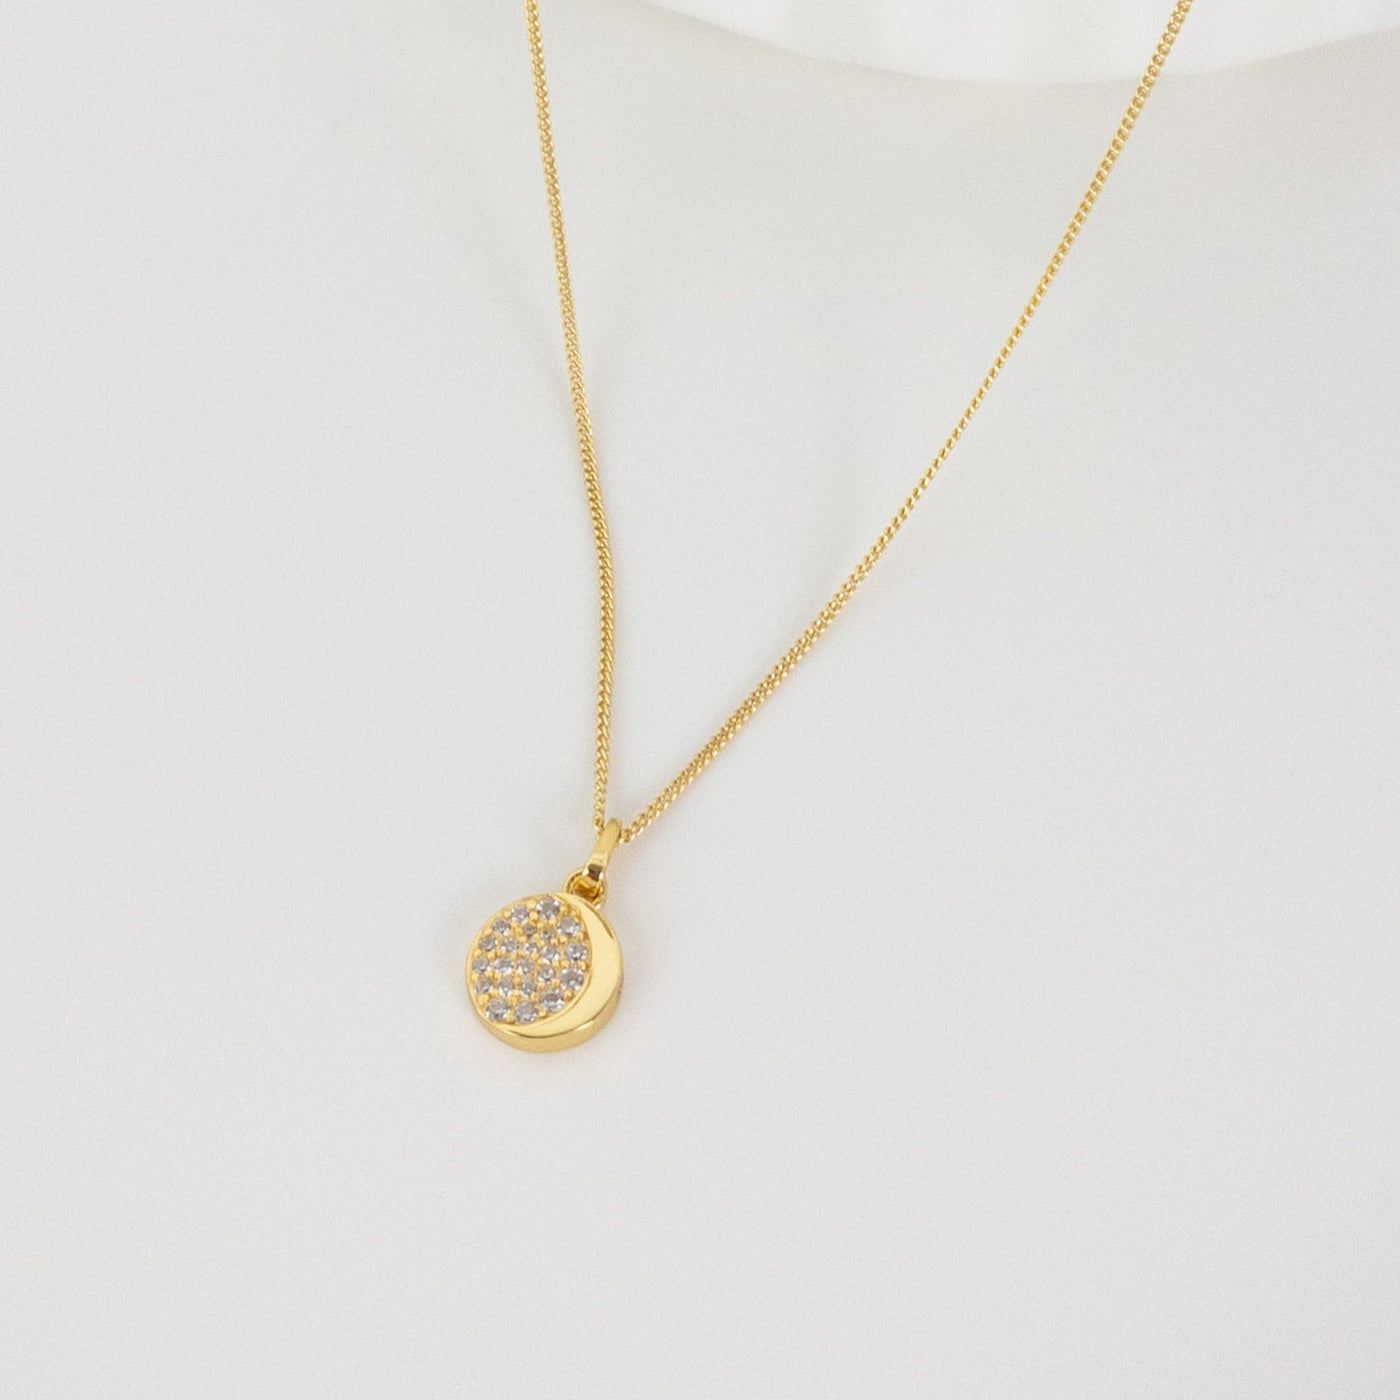 Zirconia Moon Pendant Necklace Sterling Silver Gold